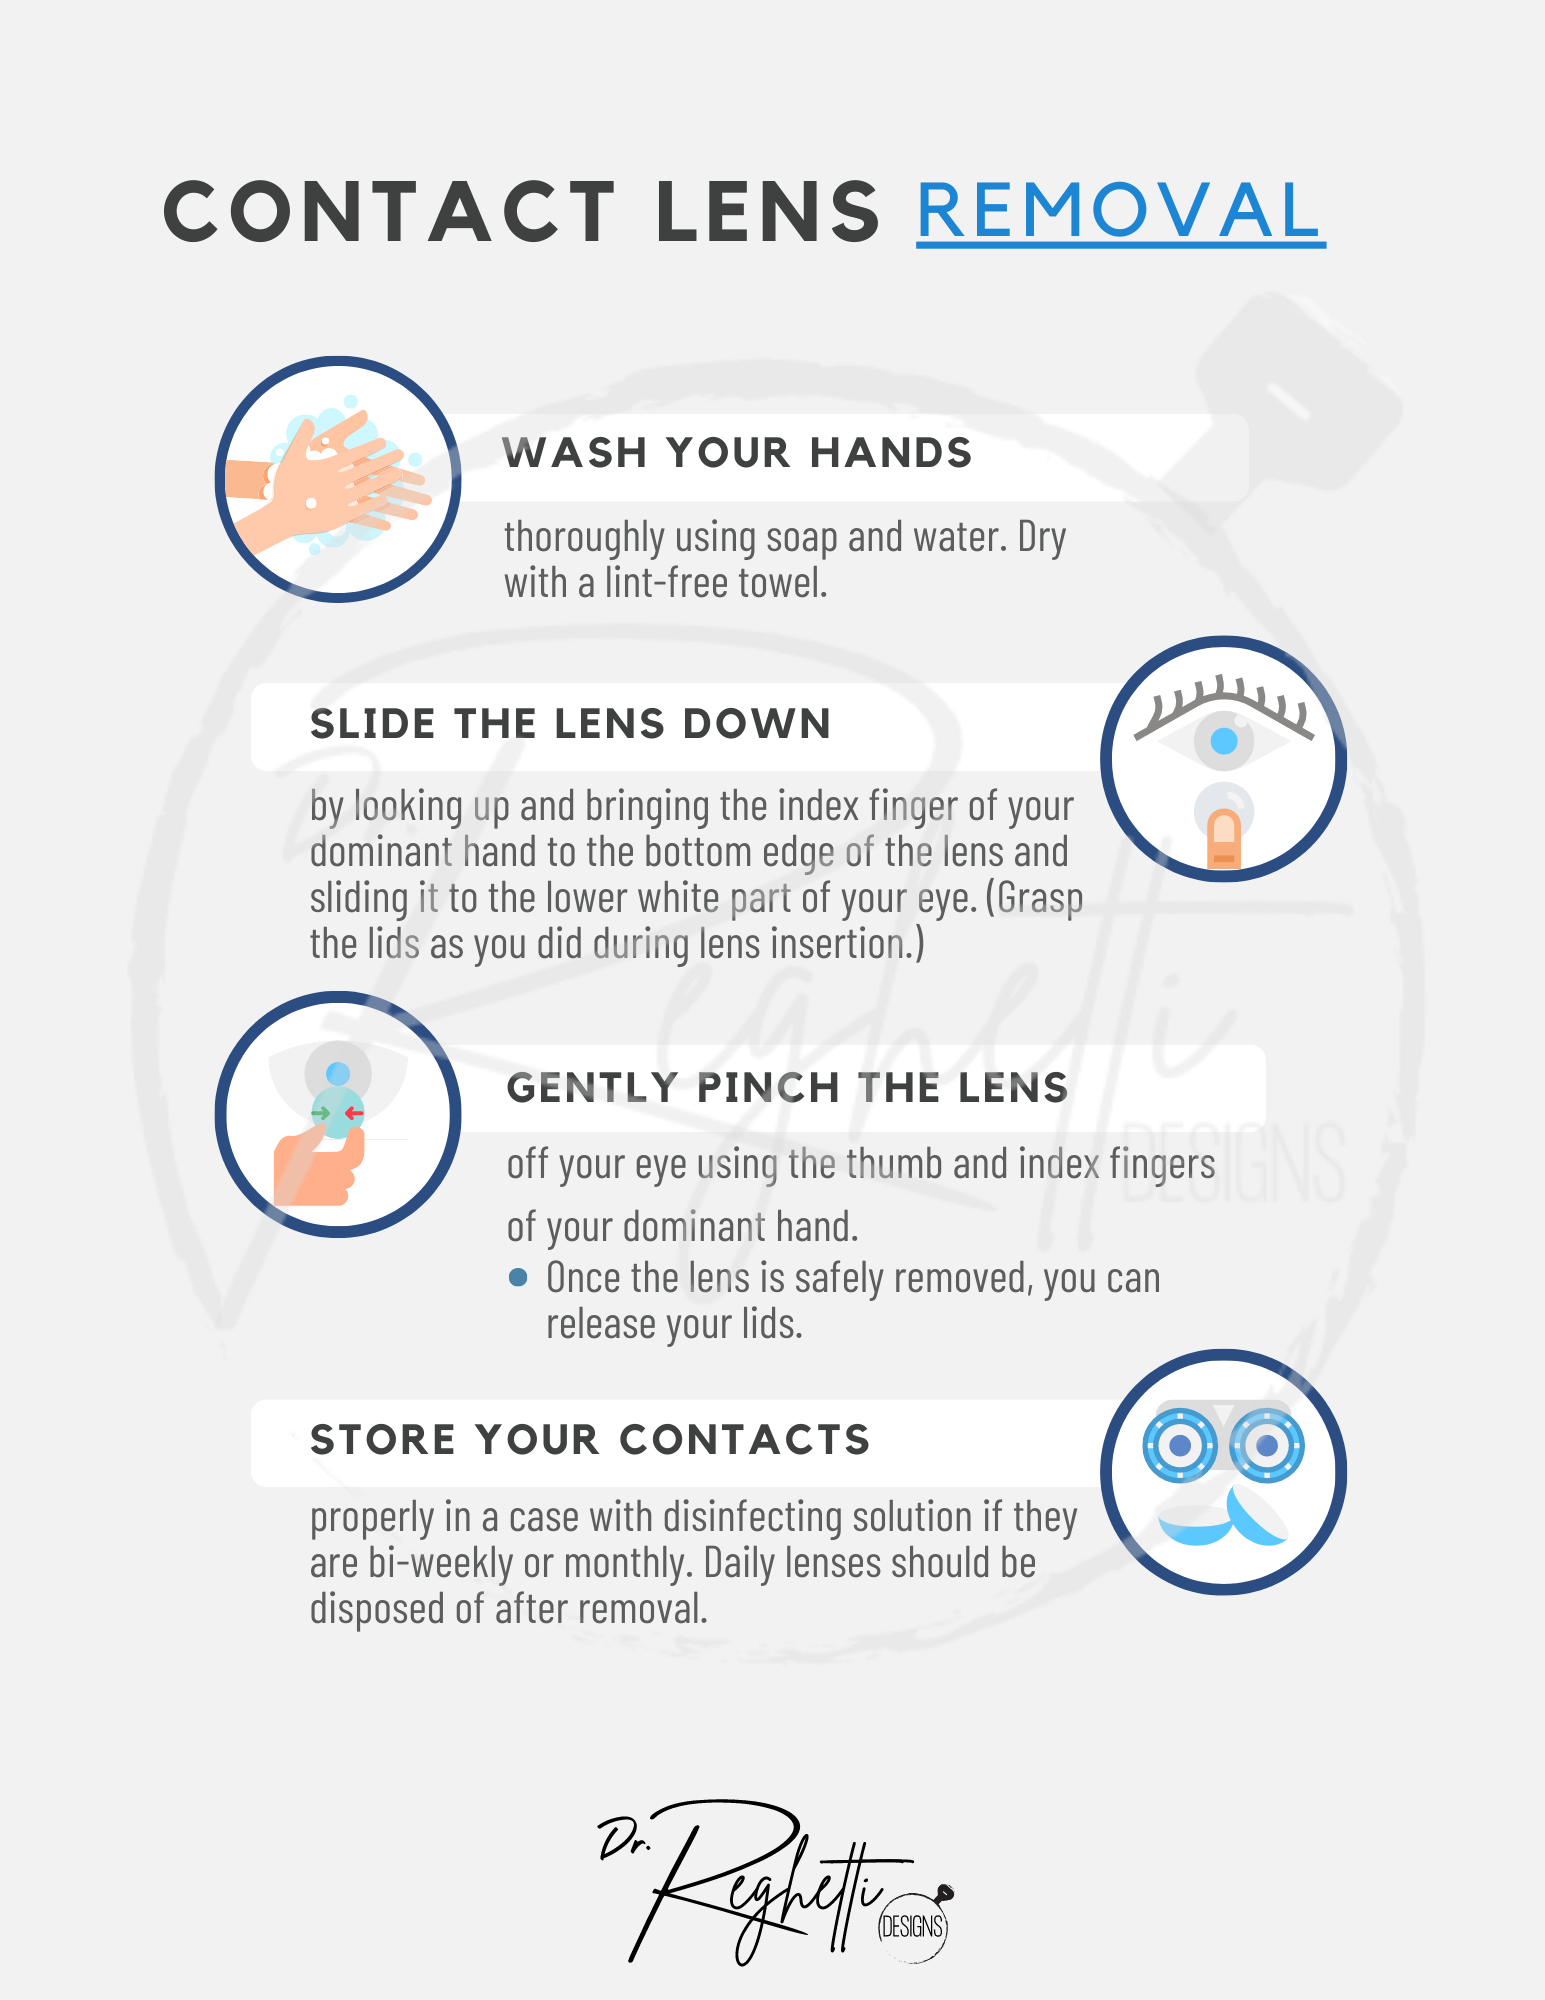 contact lens insertion and removal printable for optometrists